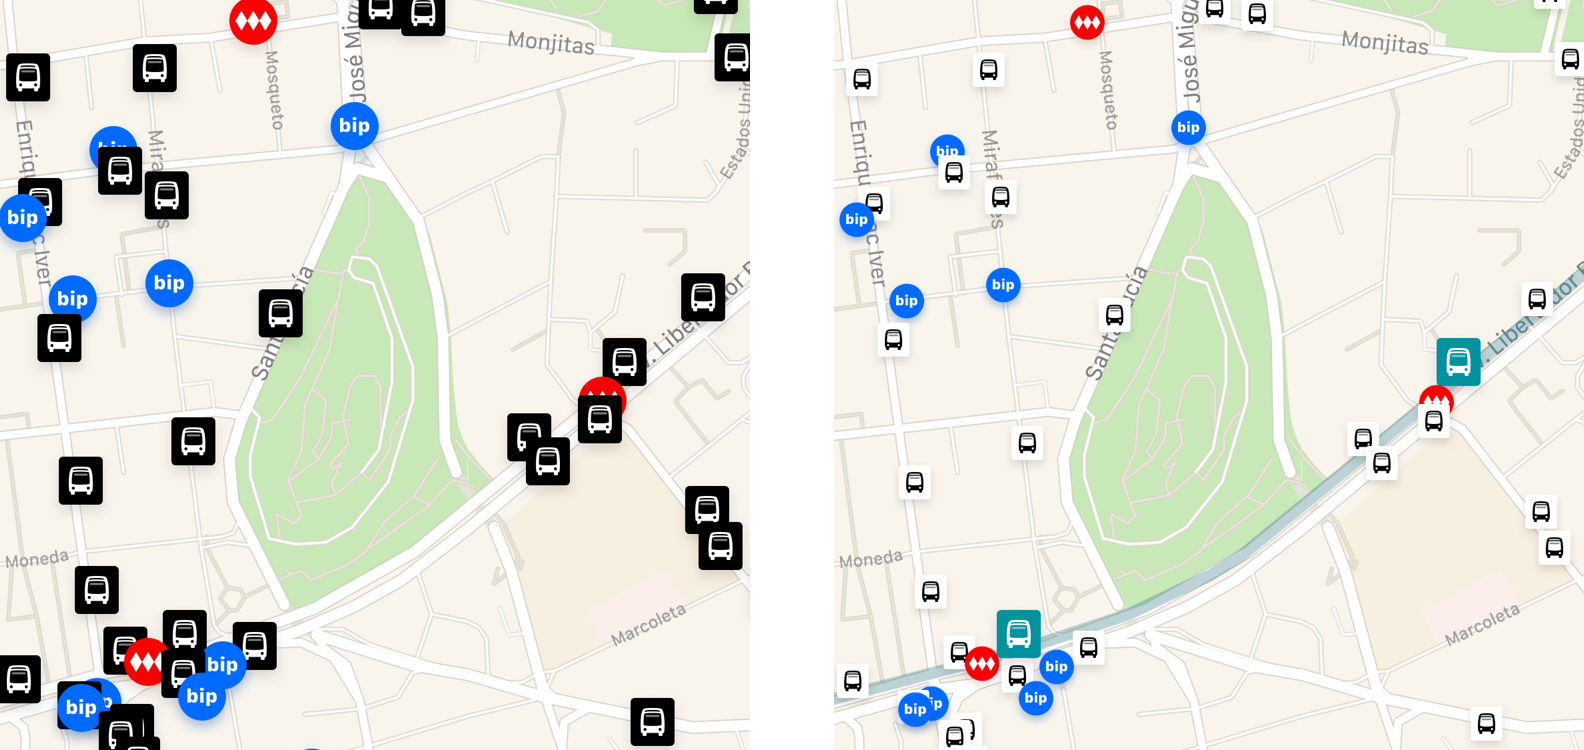 Hierarchization of routes and their stops on the map